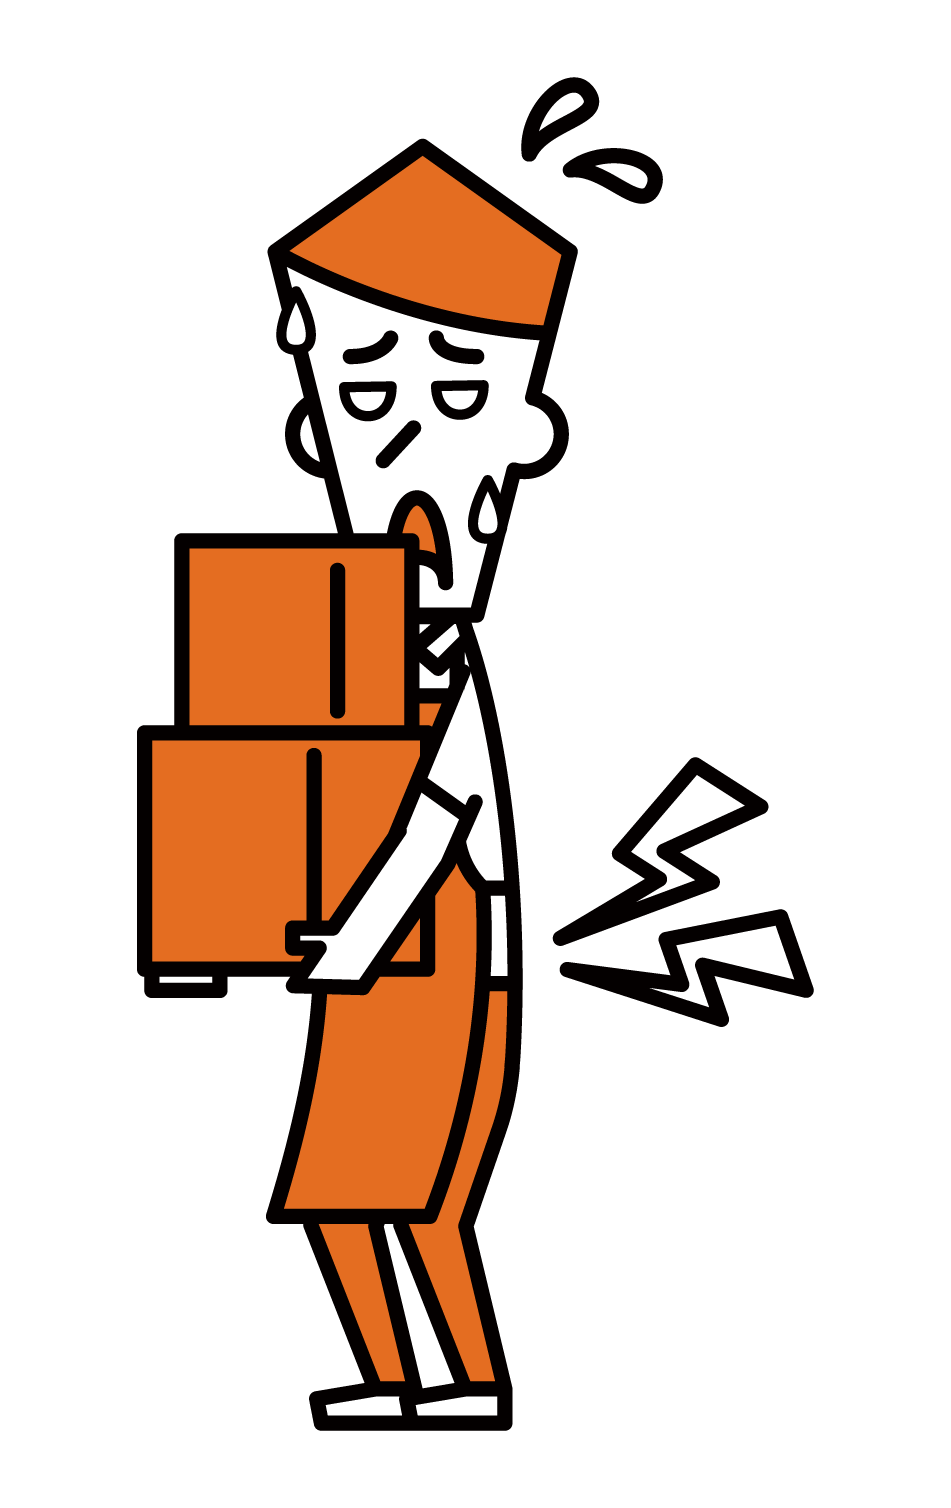 Illustration of a man who hurt his back in an industrial accident